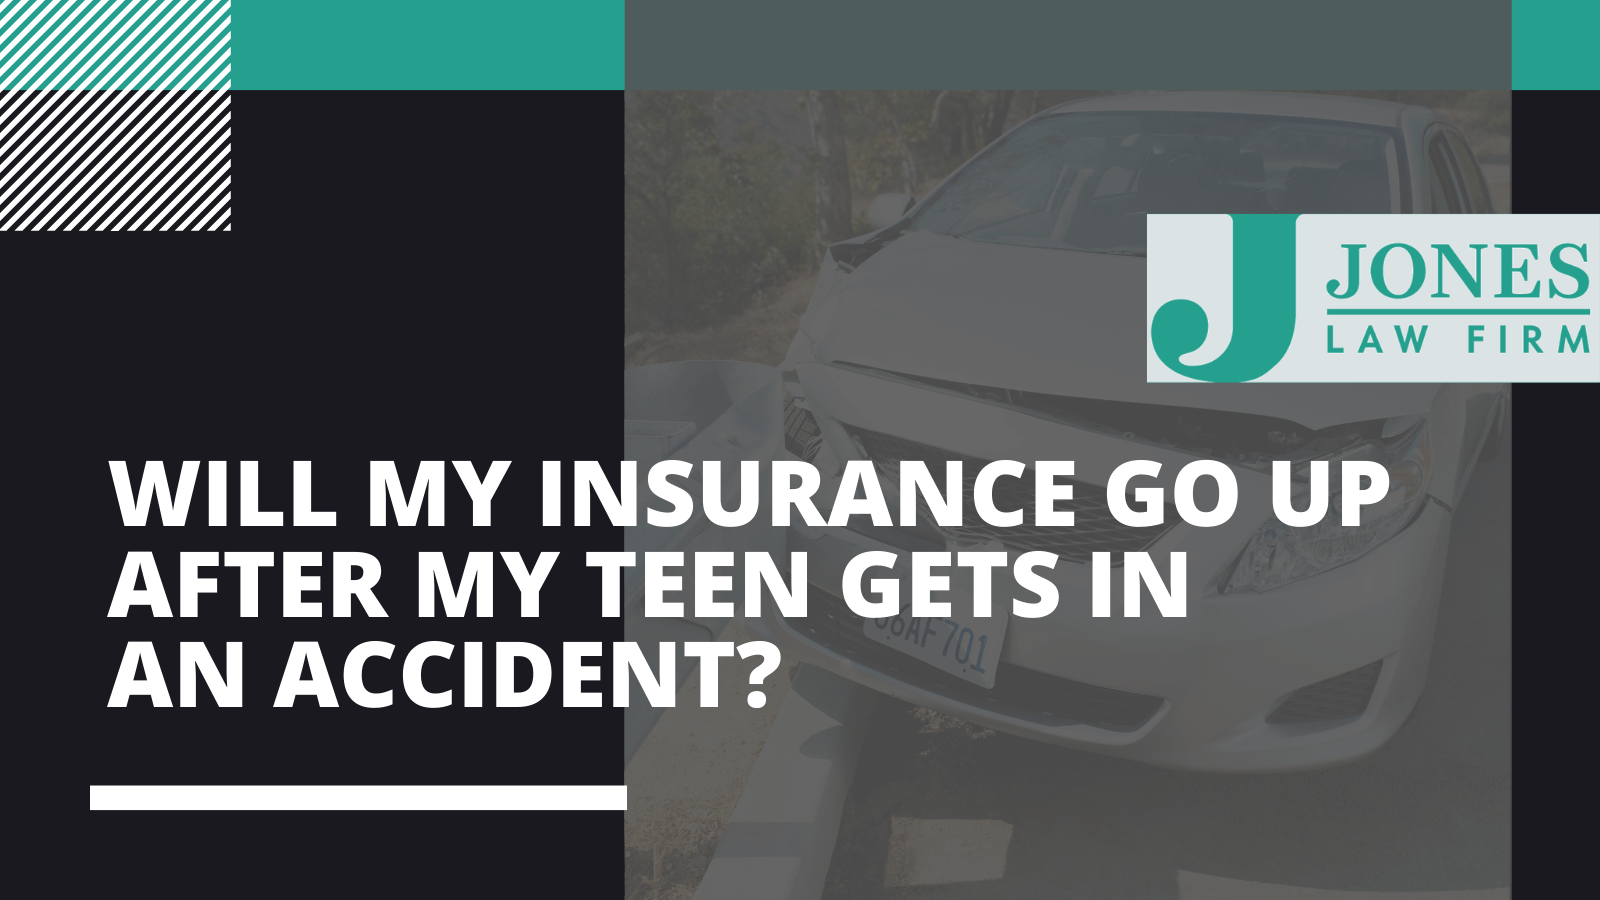 Will My Insurance Go Up After My Teen Gets In An Accident - Jones law firm - Alexandria louisiana